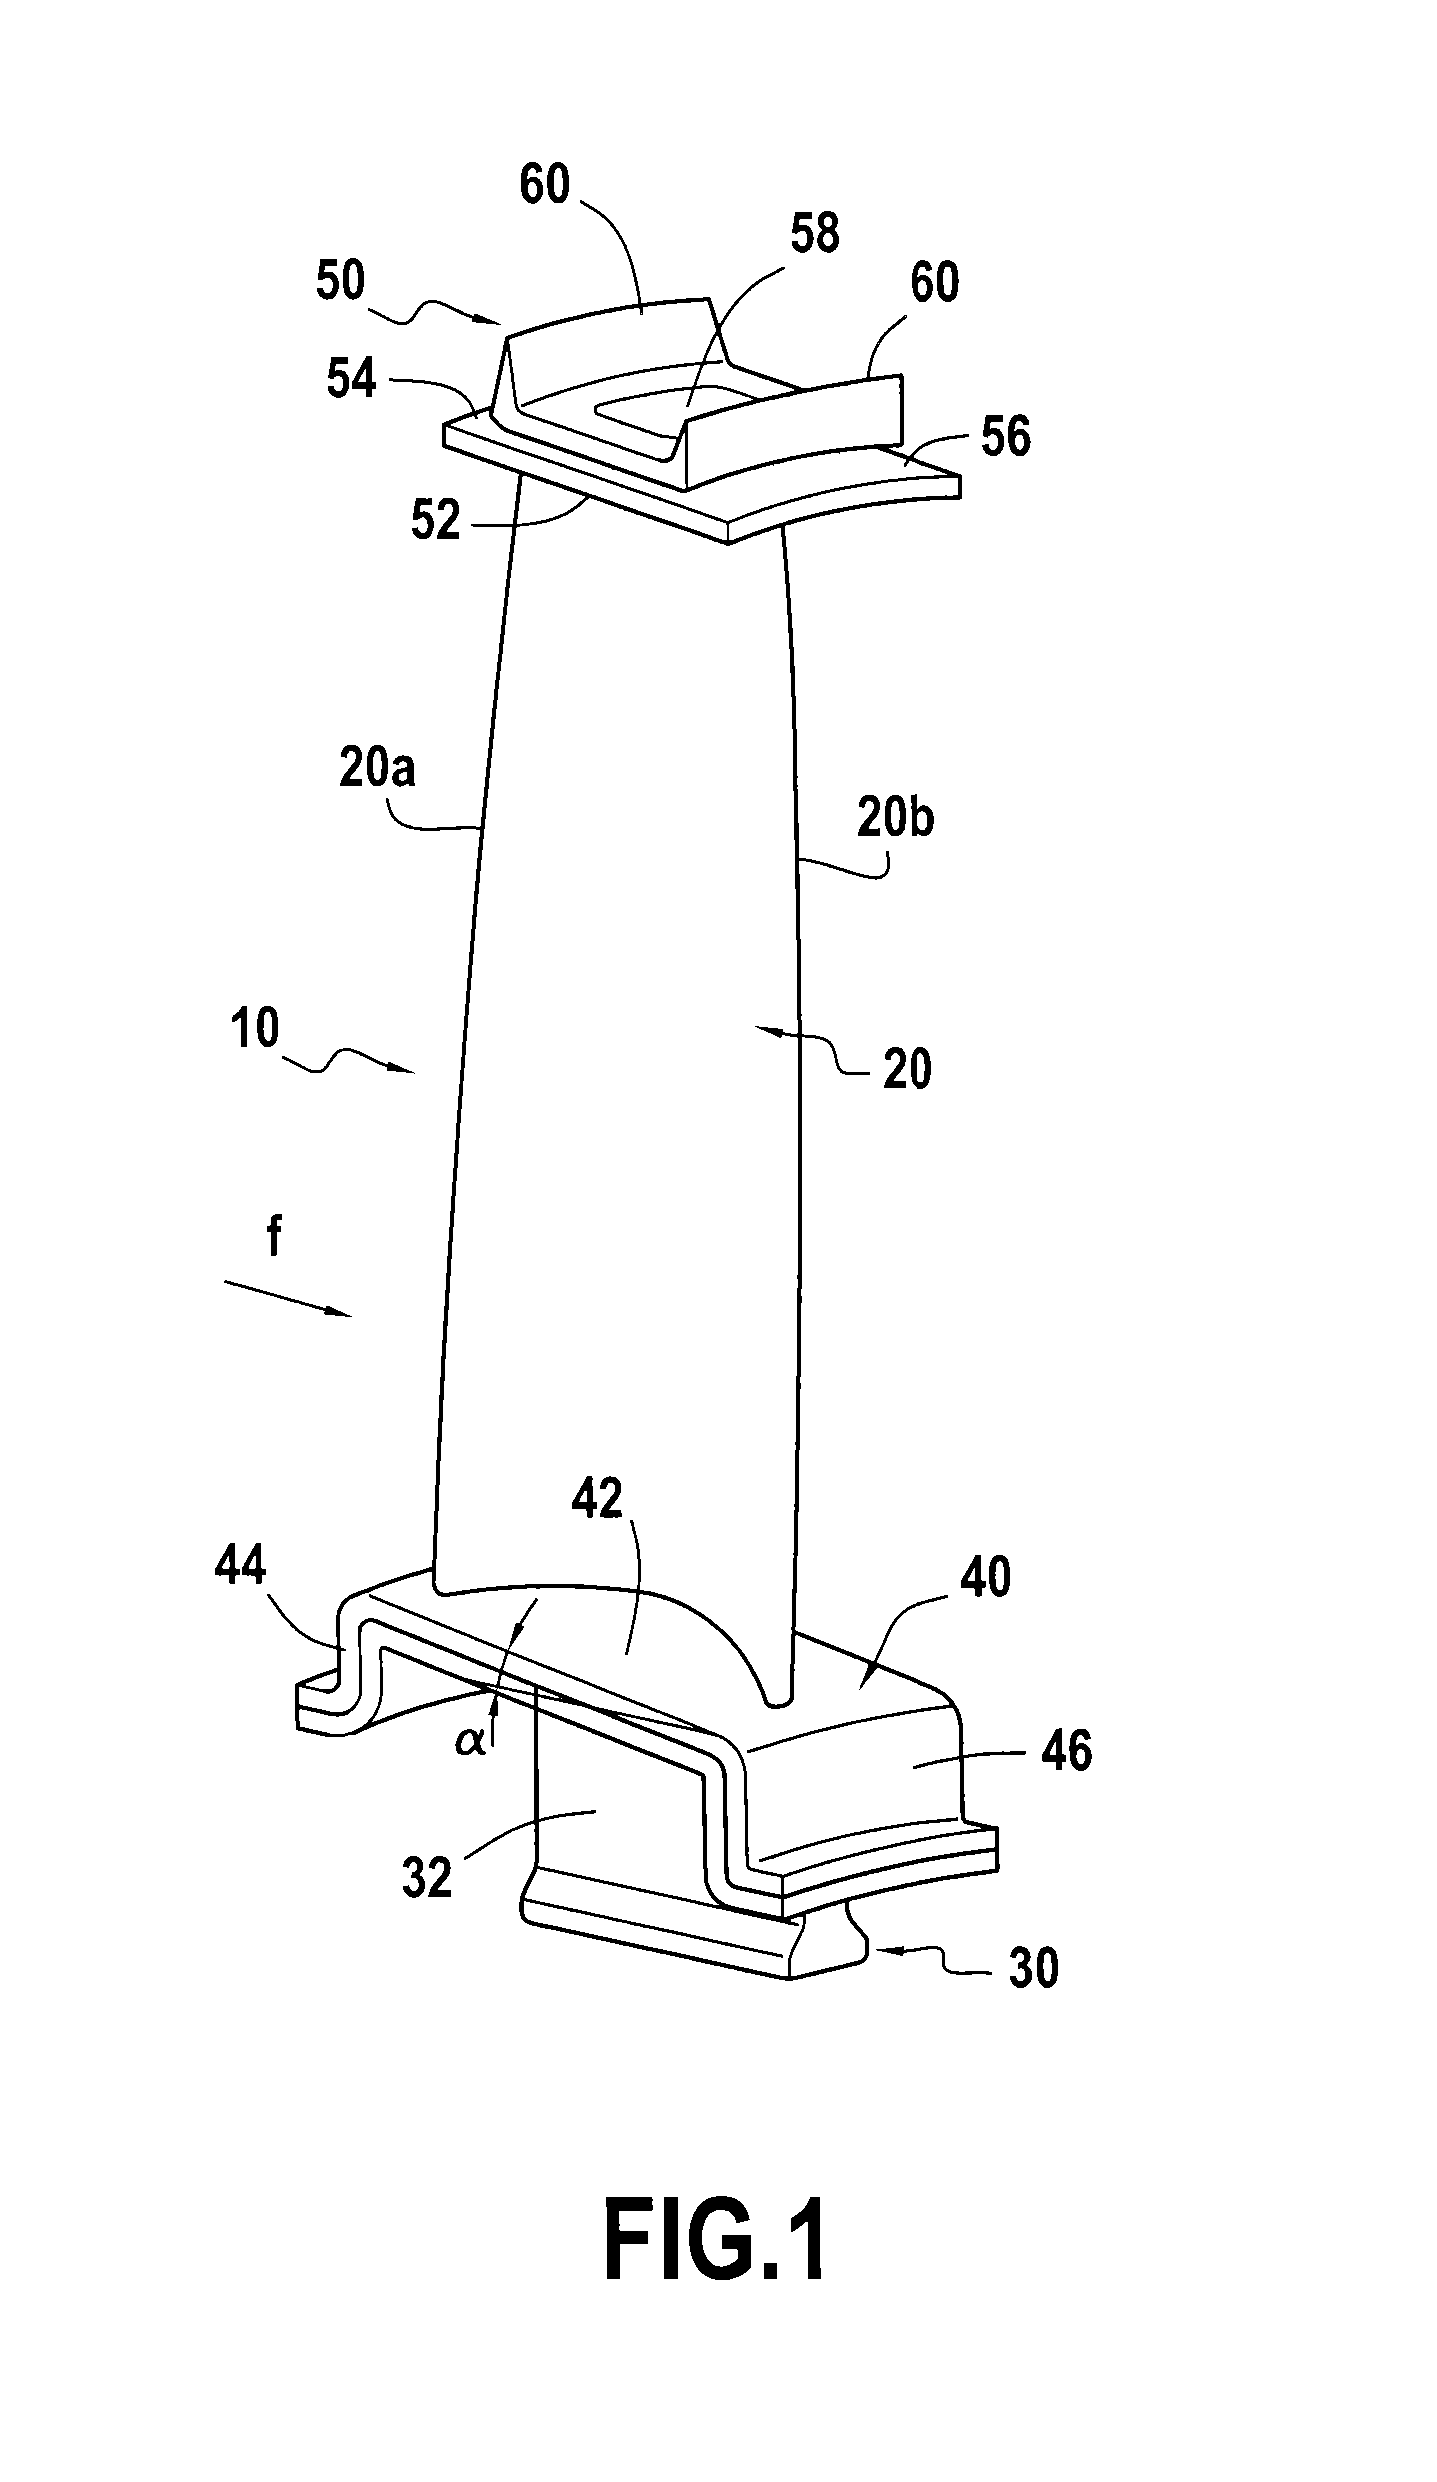 Turbine engine blade or vane made of composite material, turbine nozzle or compressor stator incorporating such vanes and method of fabricating same